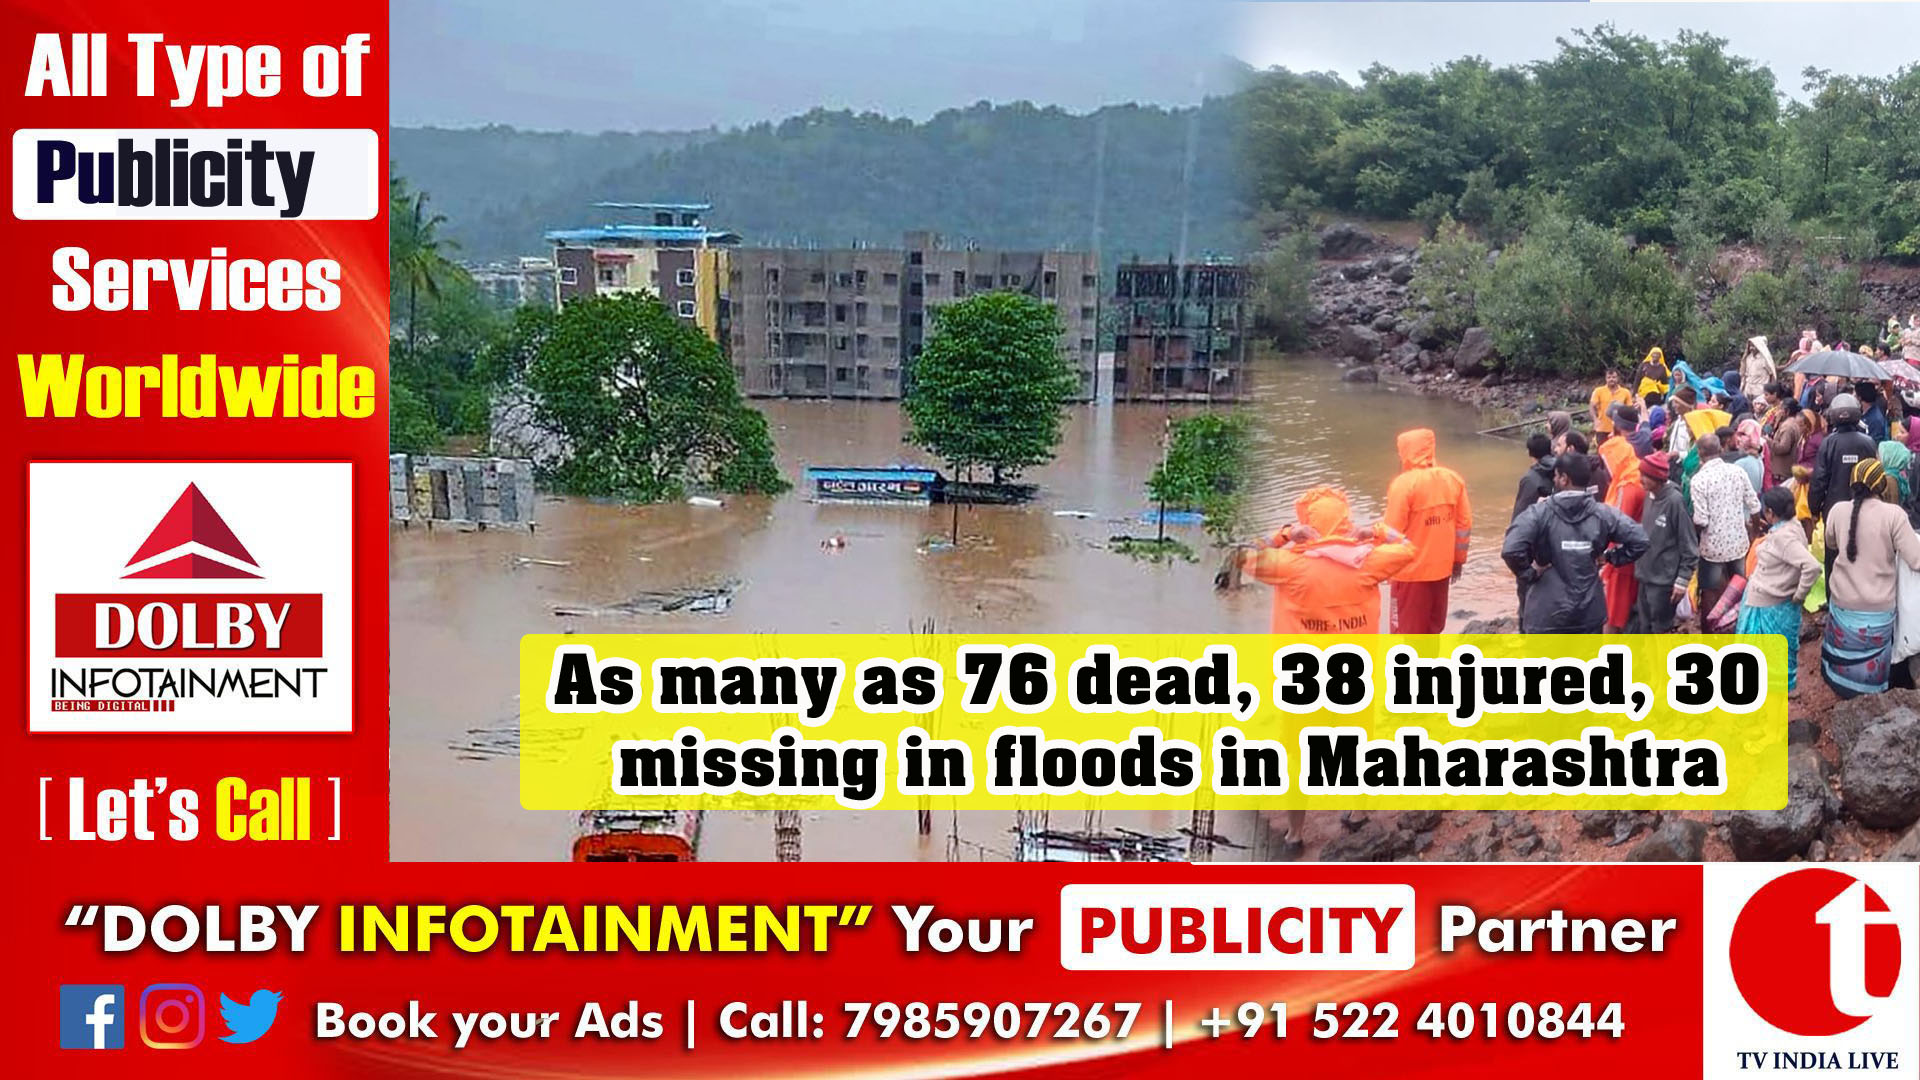 As many as 76 dead, 38 injured, 30 missing in floods in Maharashtra